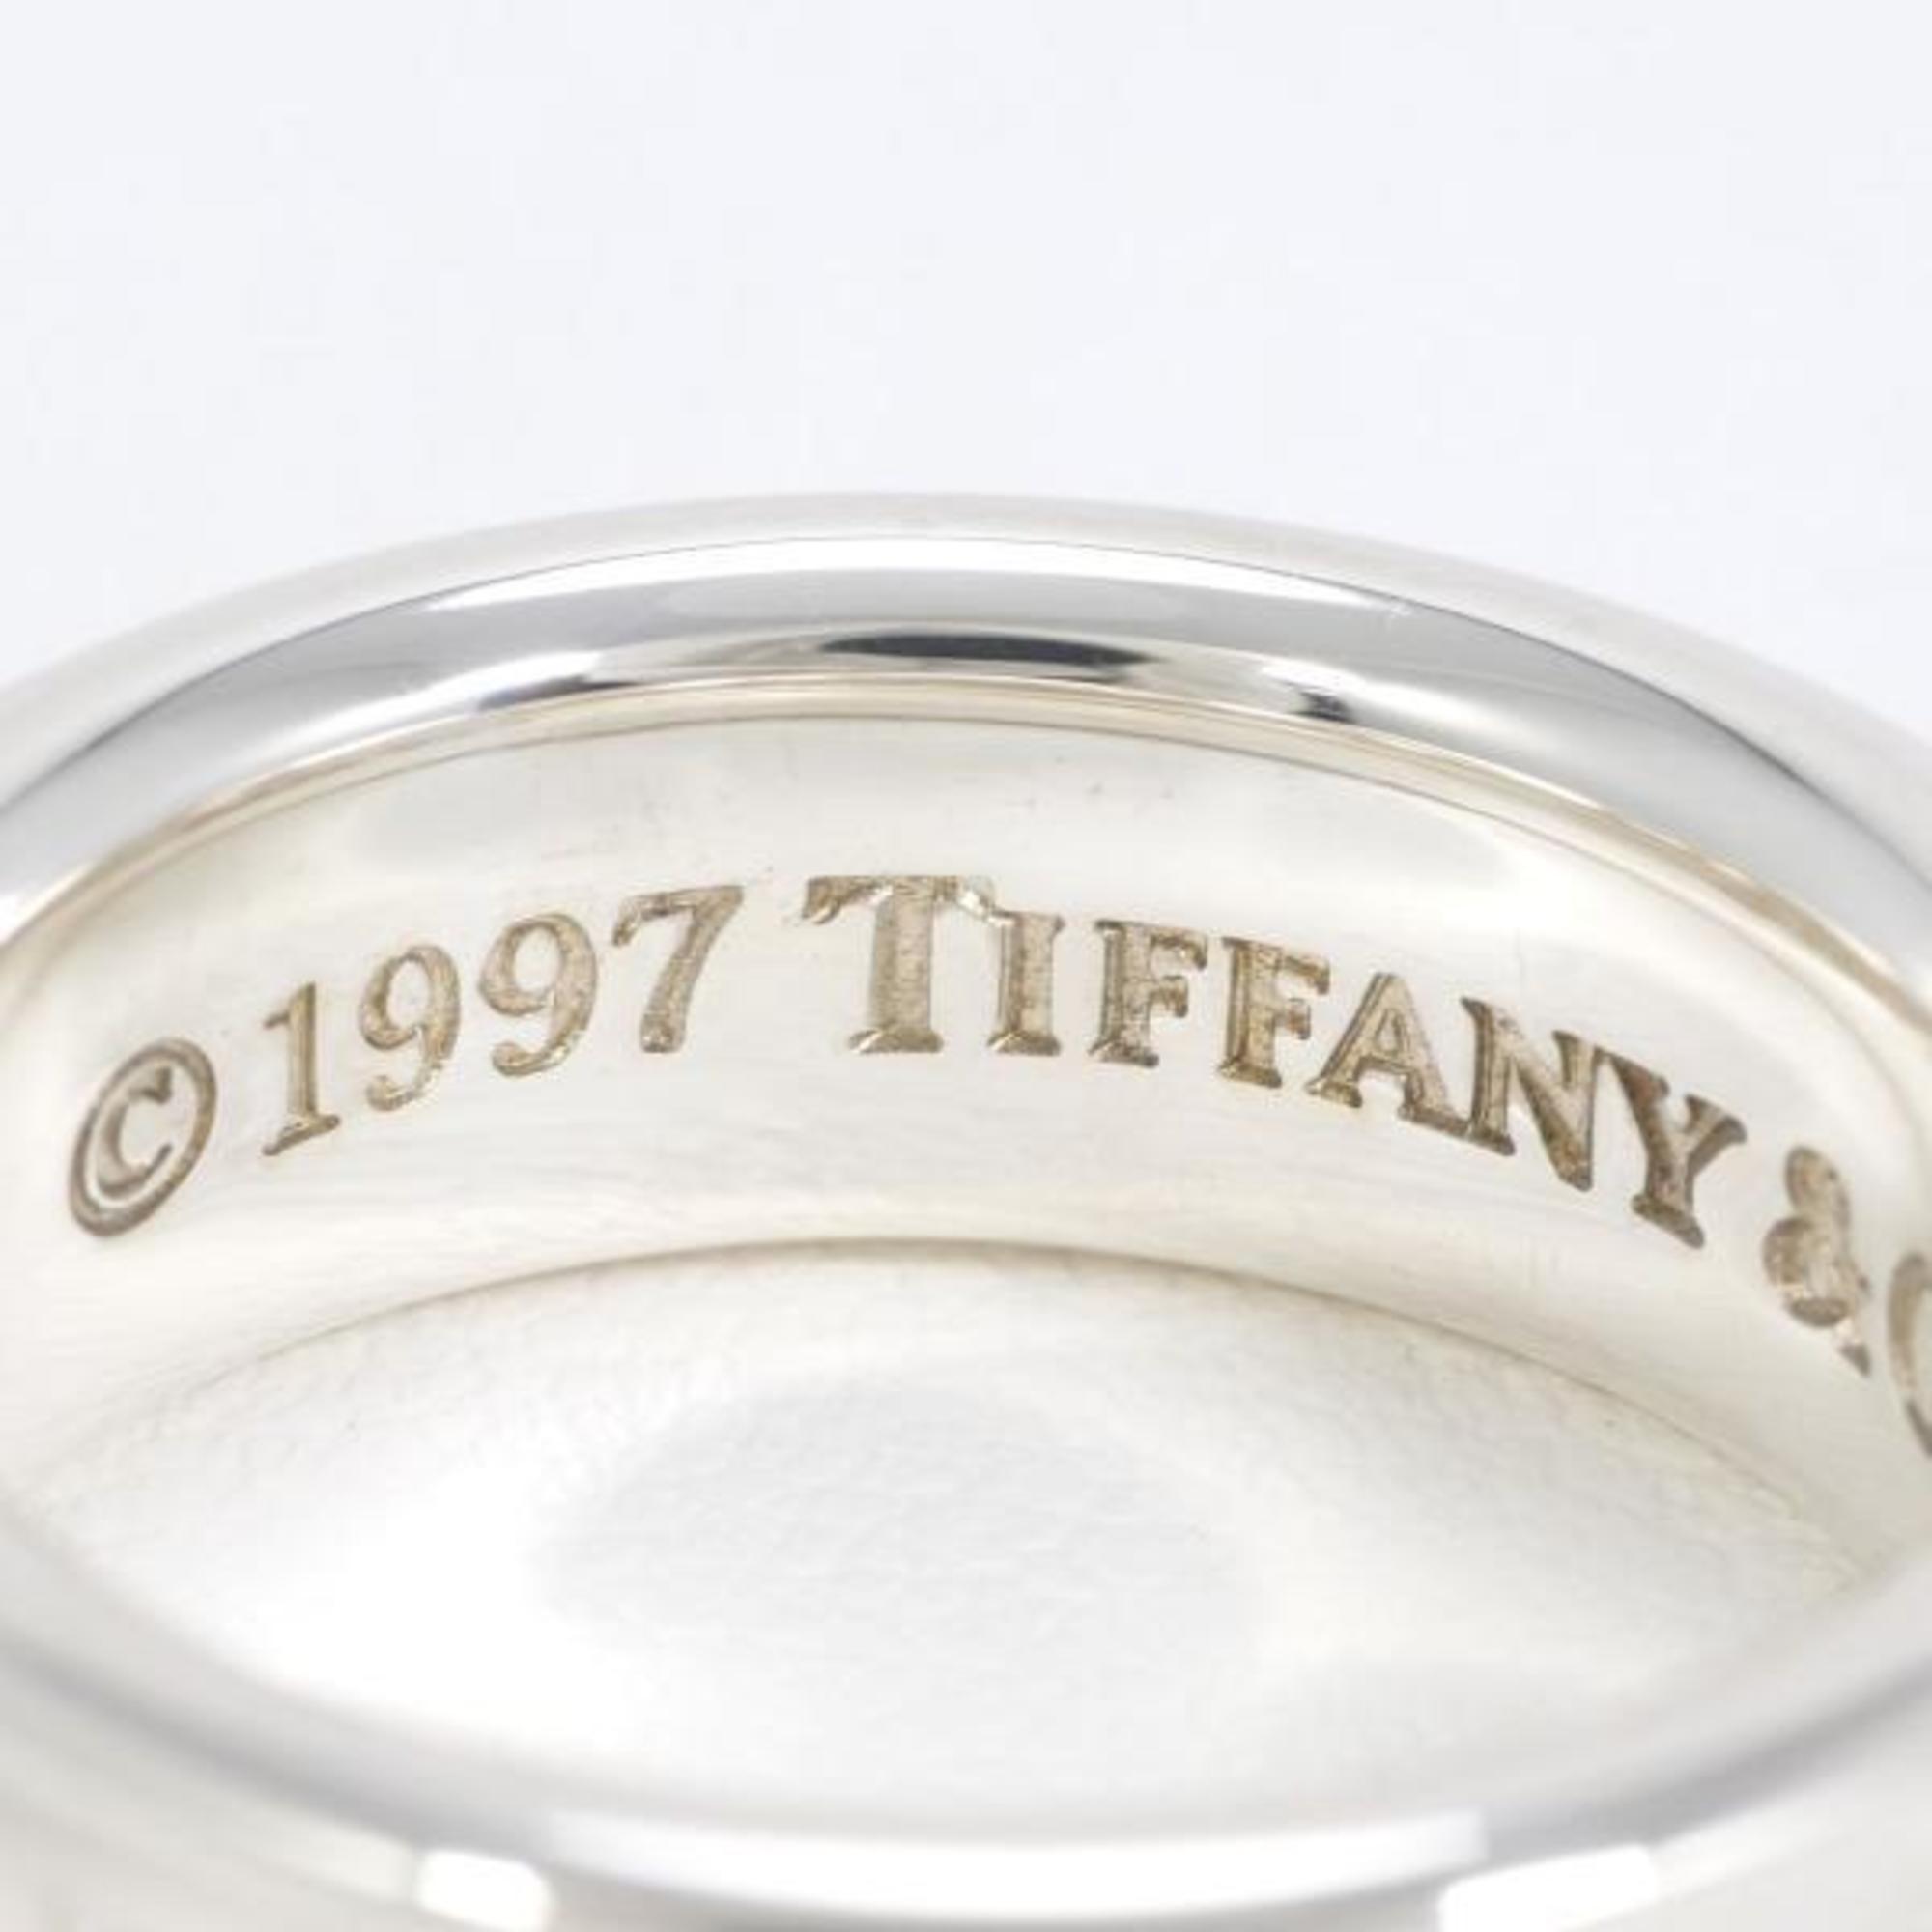 Tiffany 1837 Silver Ring Total Weight Approx. 7.7g Jewelry